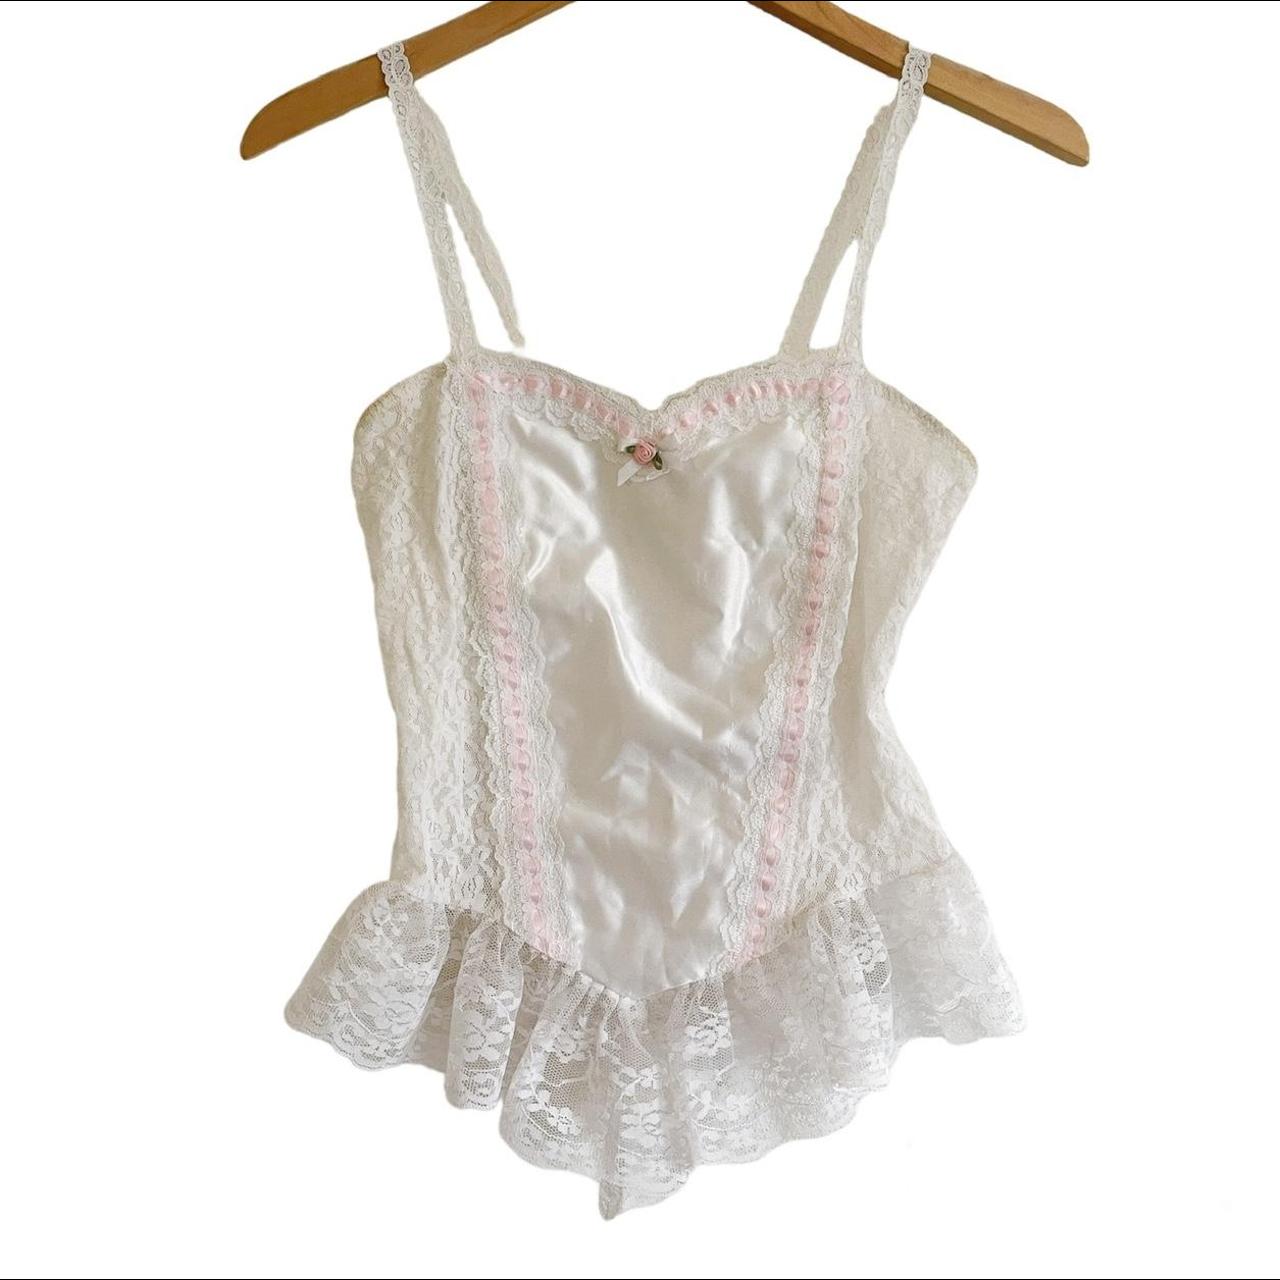 American Vintage Women's White and Pink Corset | Depop